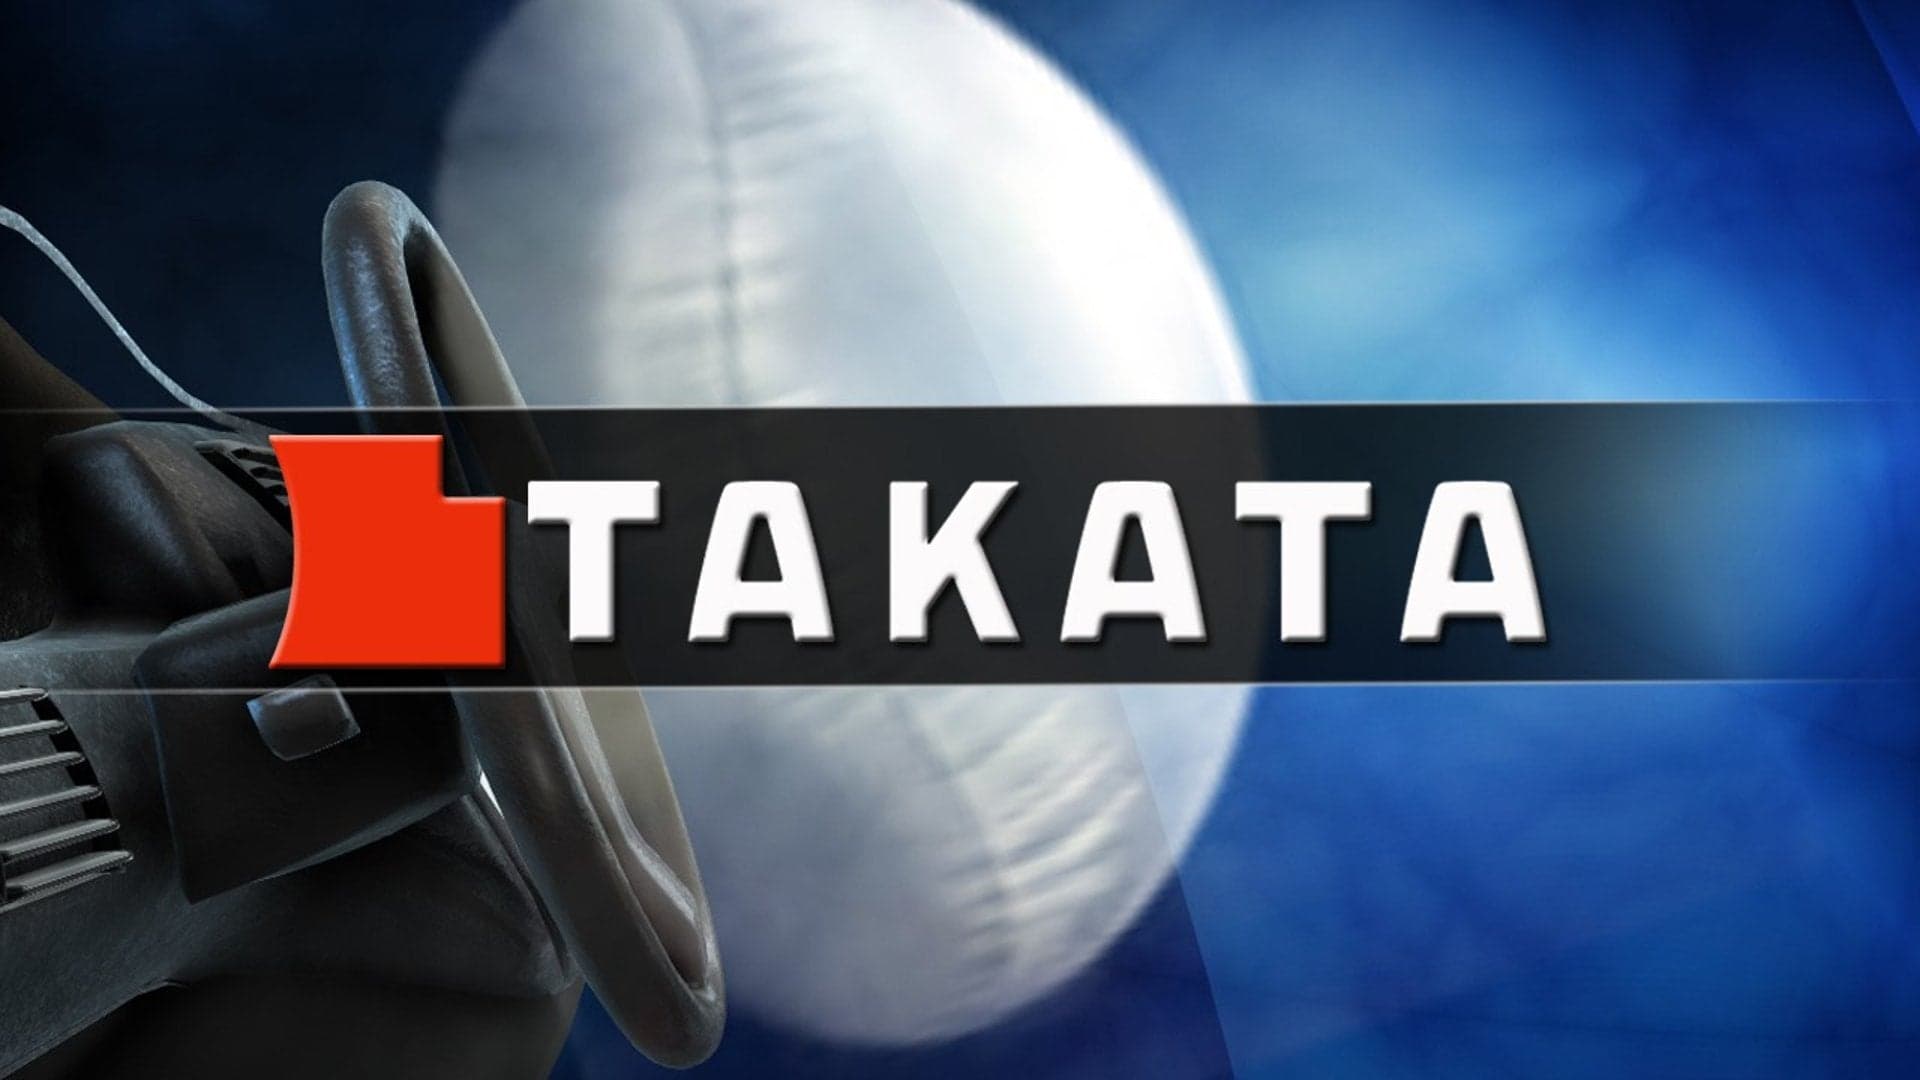 Majority of Cars Equipped With Takata Airbags Yet to Be Fixed, Senator Says